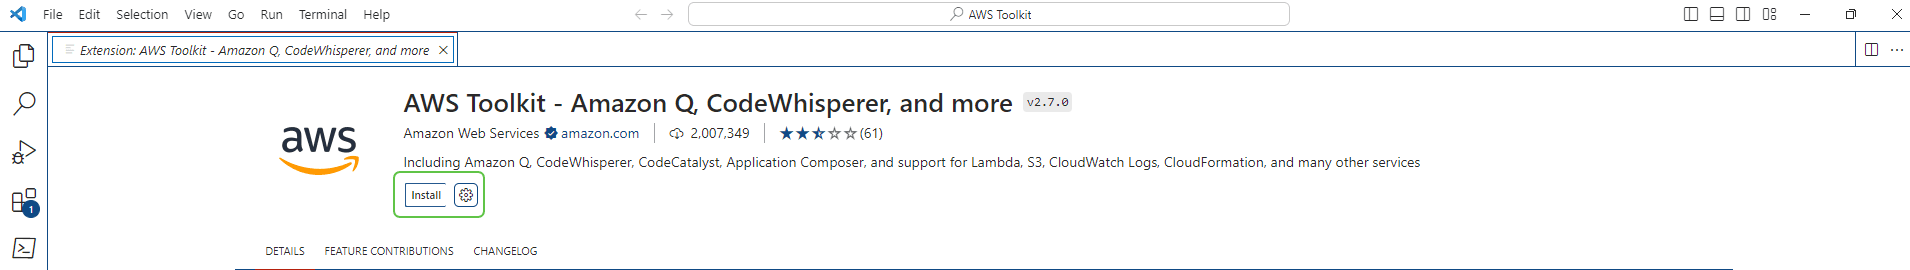 AWS Toolkit - Amazon Q, CodeWhisperer, and more